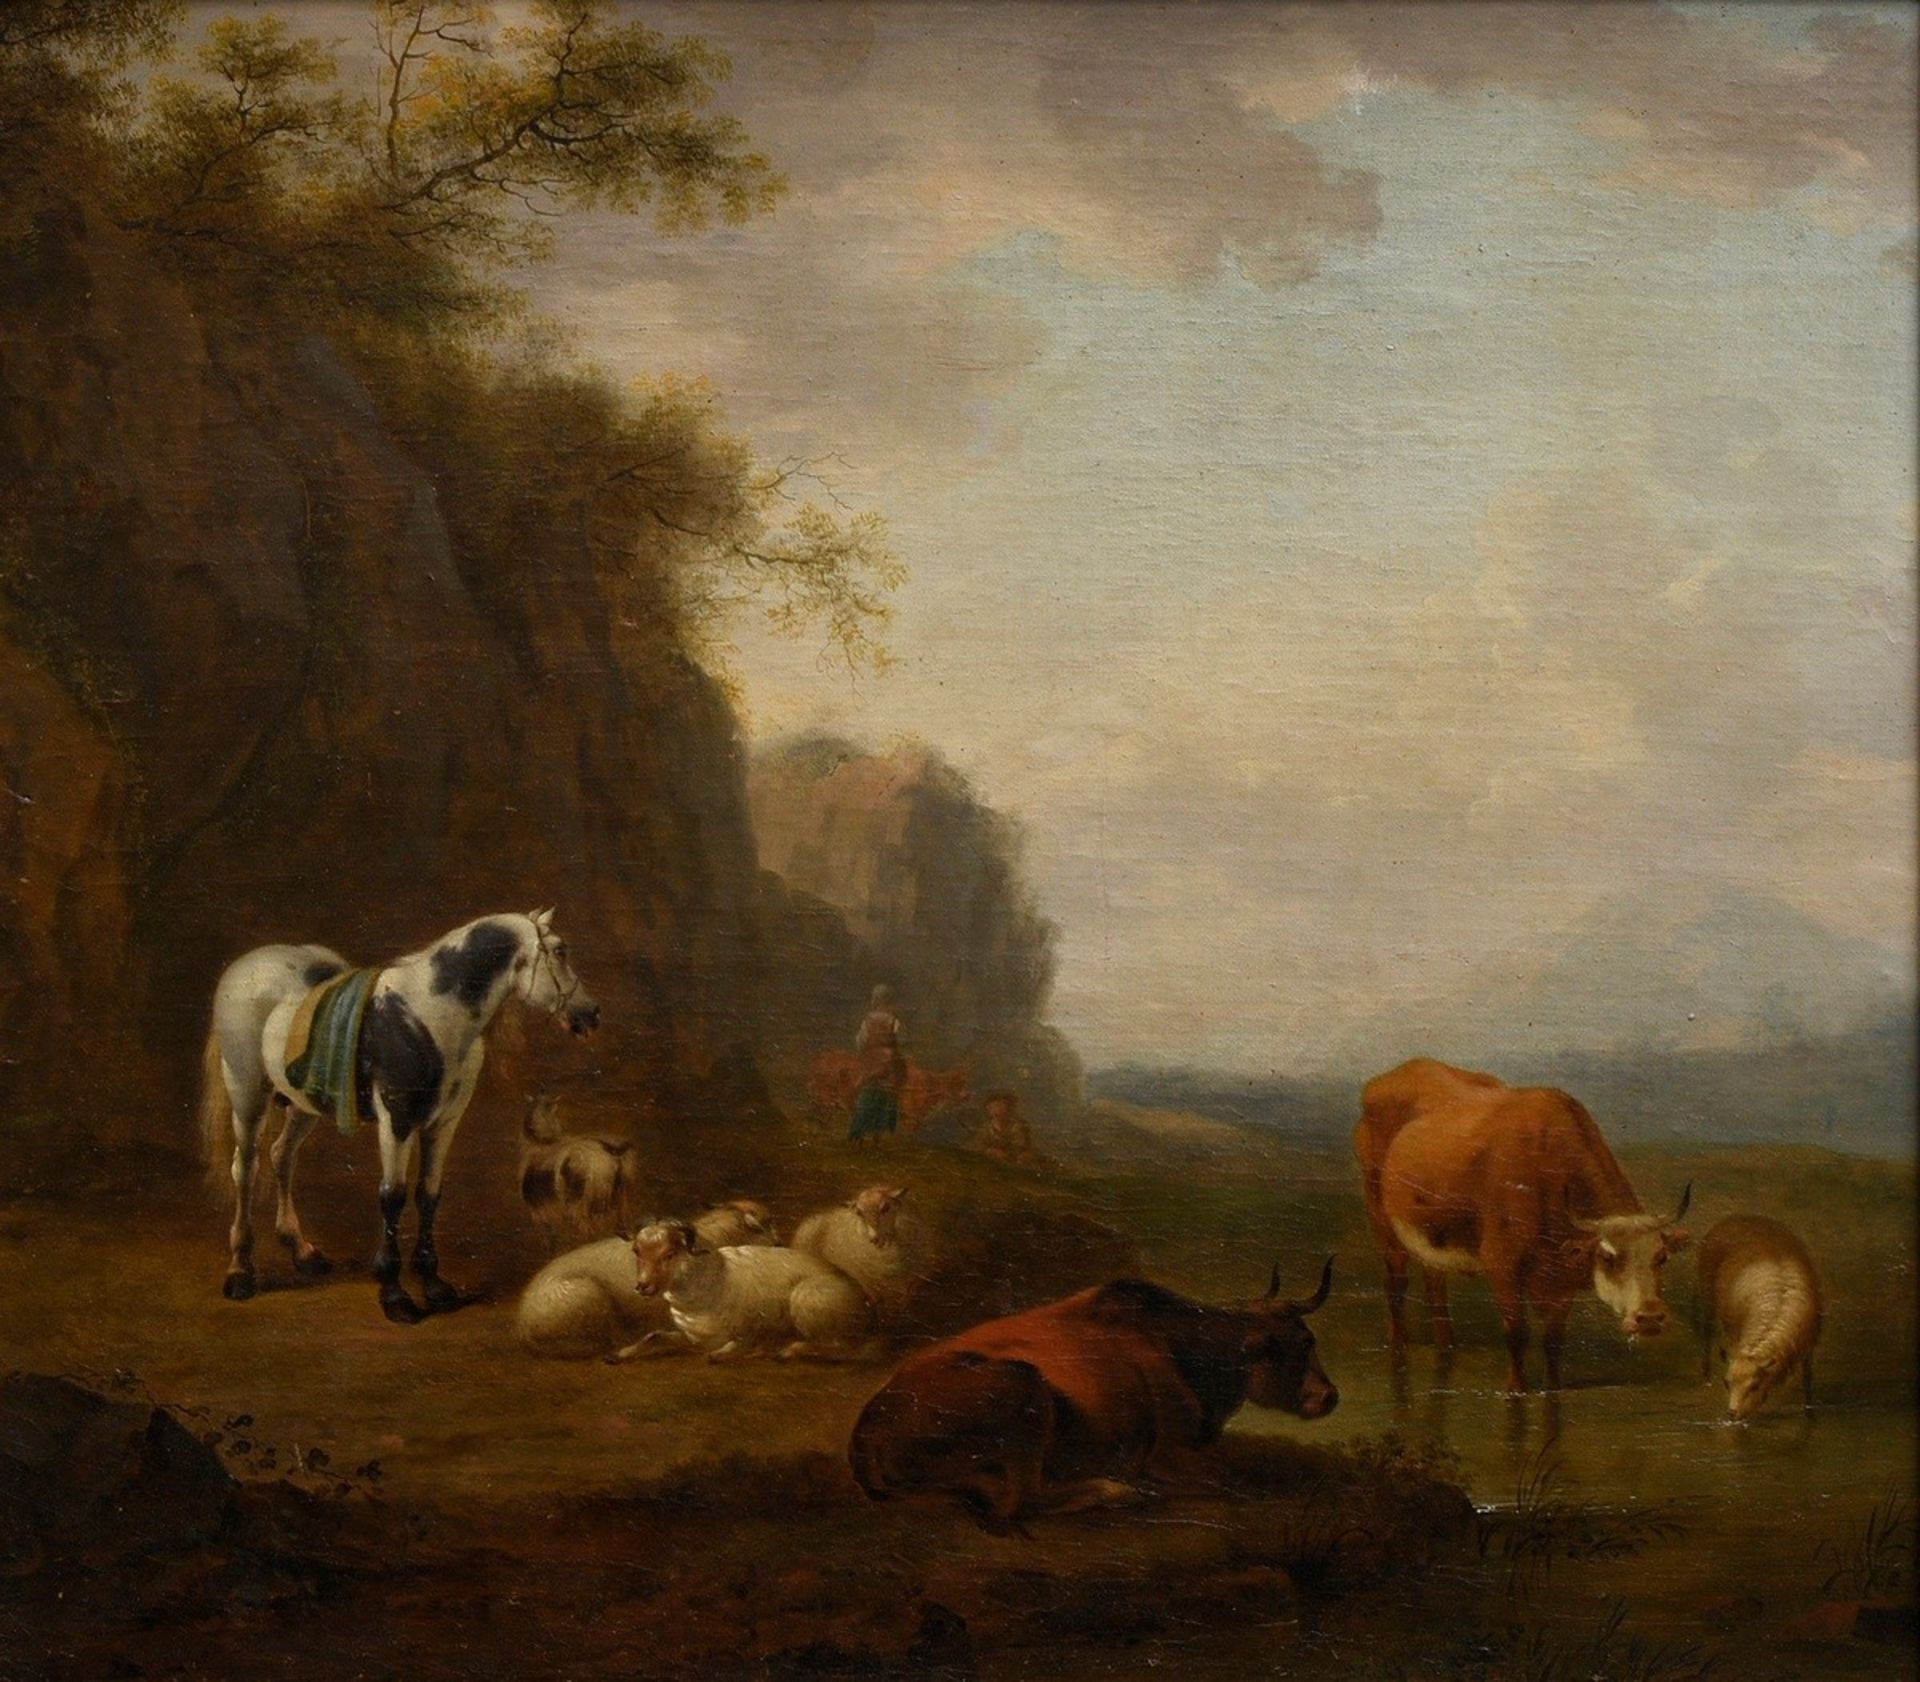 Calraet, Abraham van (1642-1722) "Herd at the Watering Trough", oil/canvas, inscr. on verso, magnif